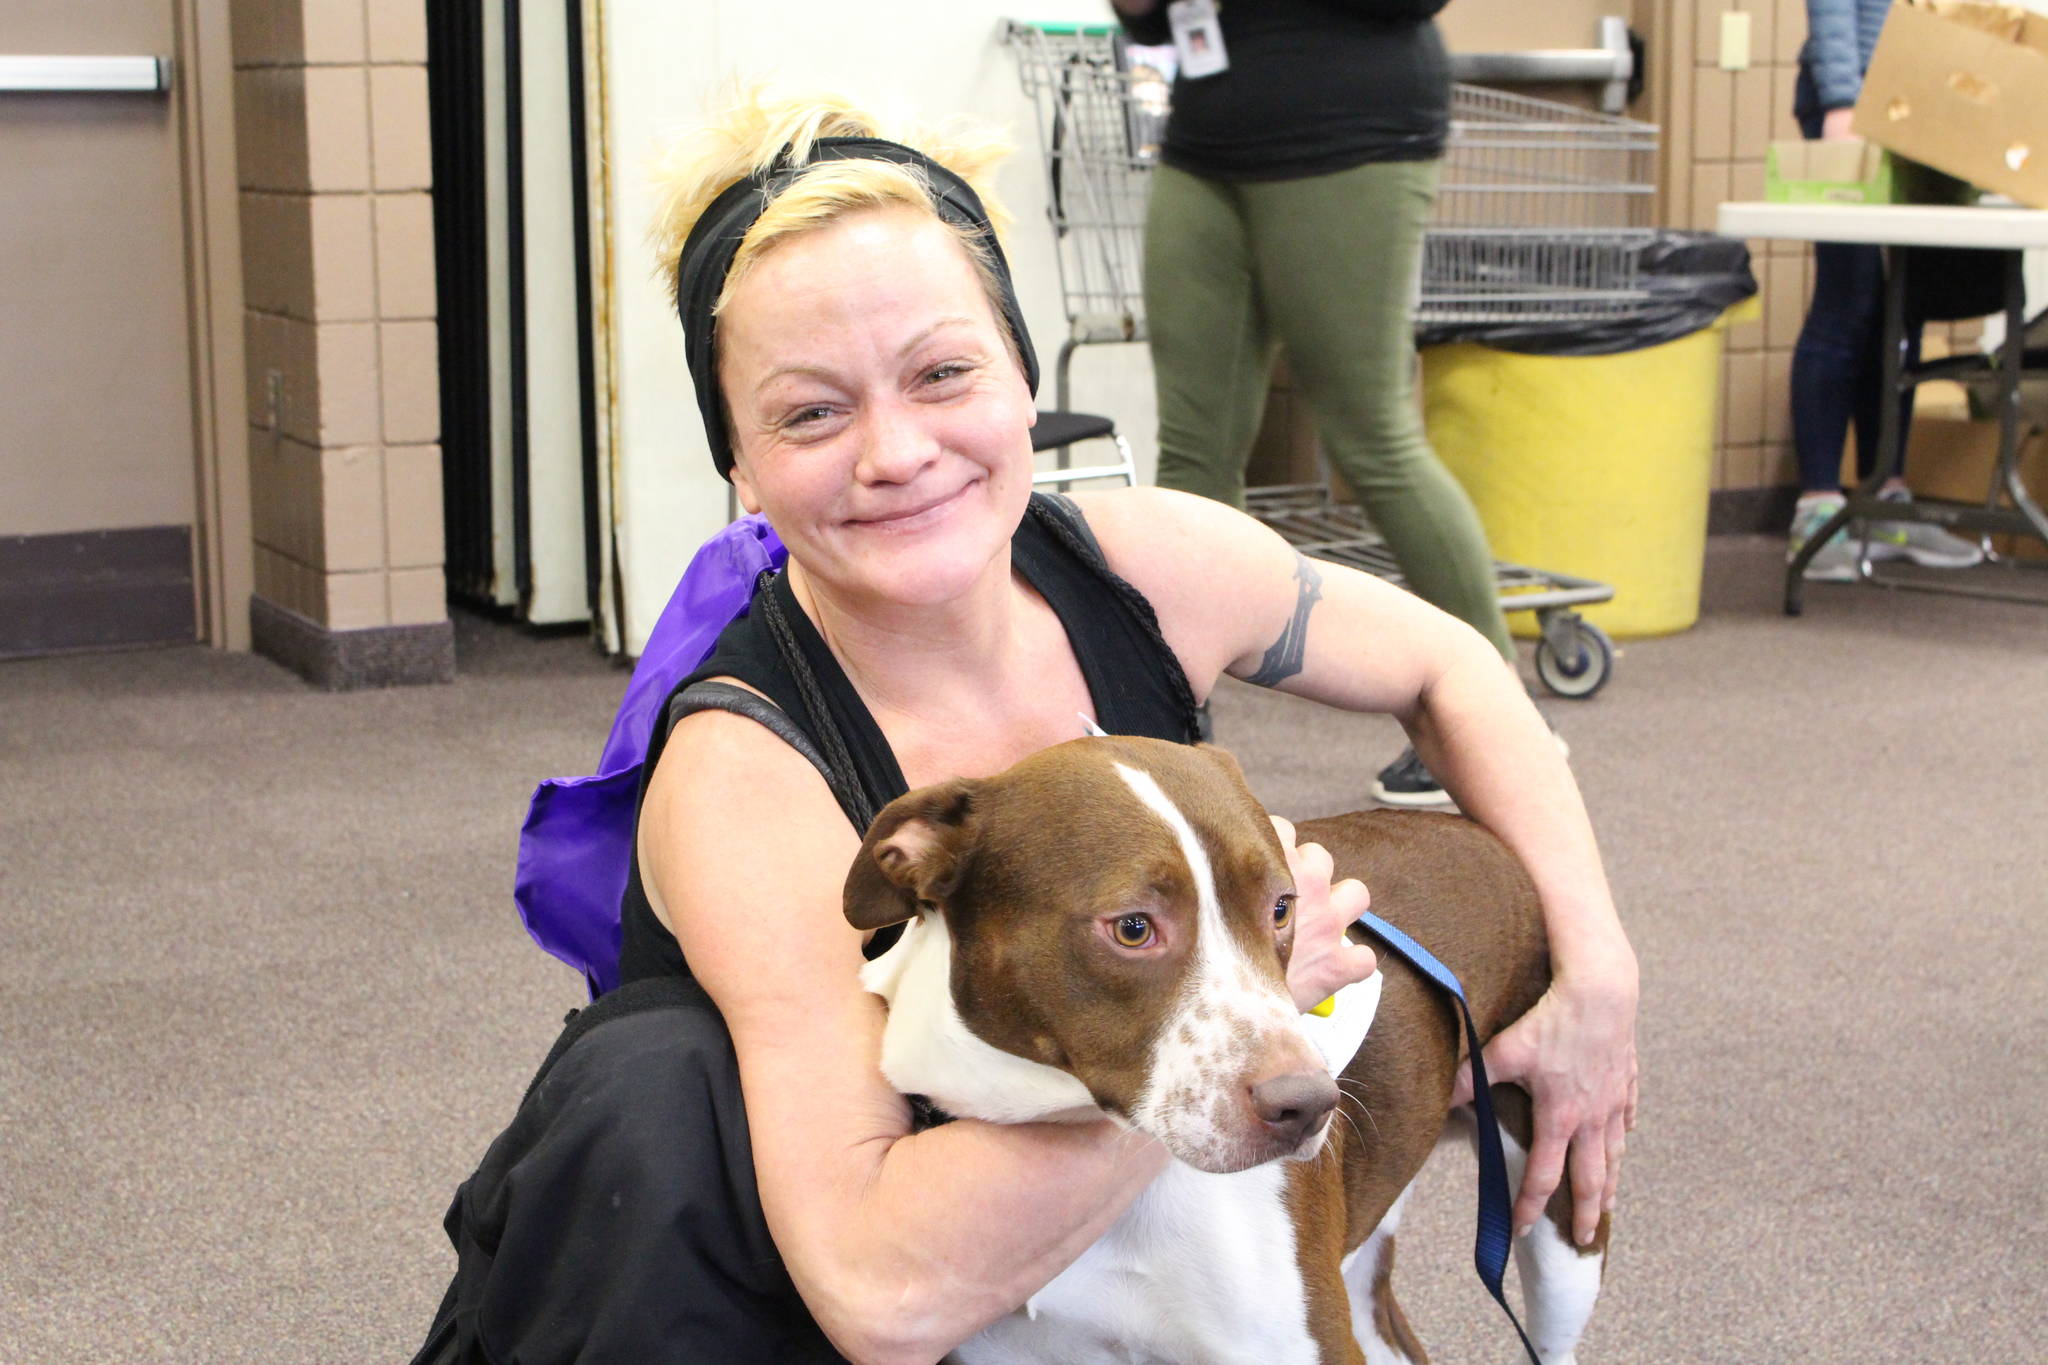 Danielle Bauman and her dog Dozer attend the 2020 Project Homeless Connect event at the Soldotna Regional Sports Complex in Soldotna, Alaska, on Jan. 29, 2020. (Photo by Brian Mazurek/Peninsula Clarion)